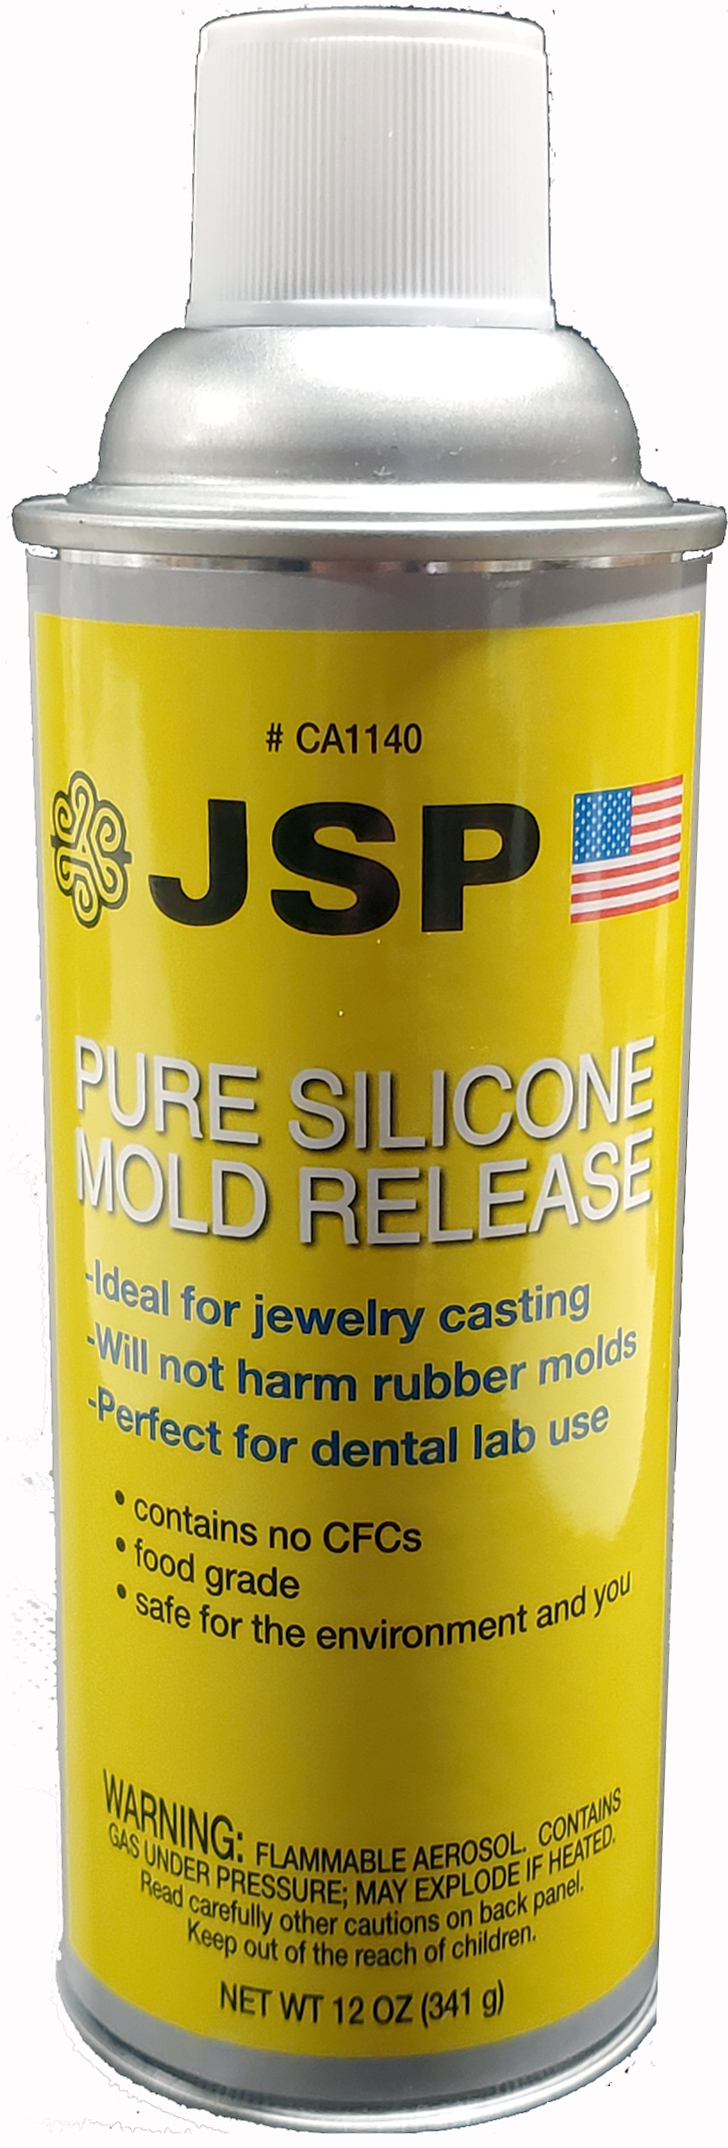 JSP MOLD RELEASE SPRAY - Click Image to Close